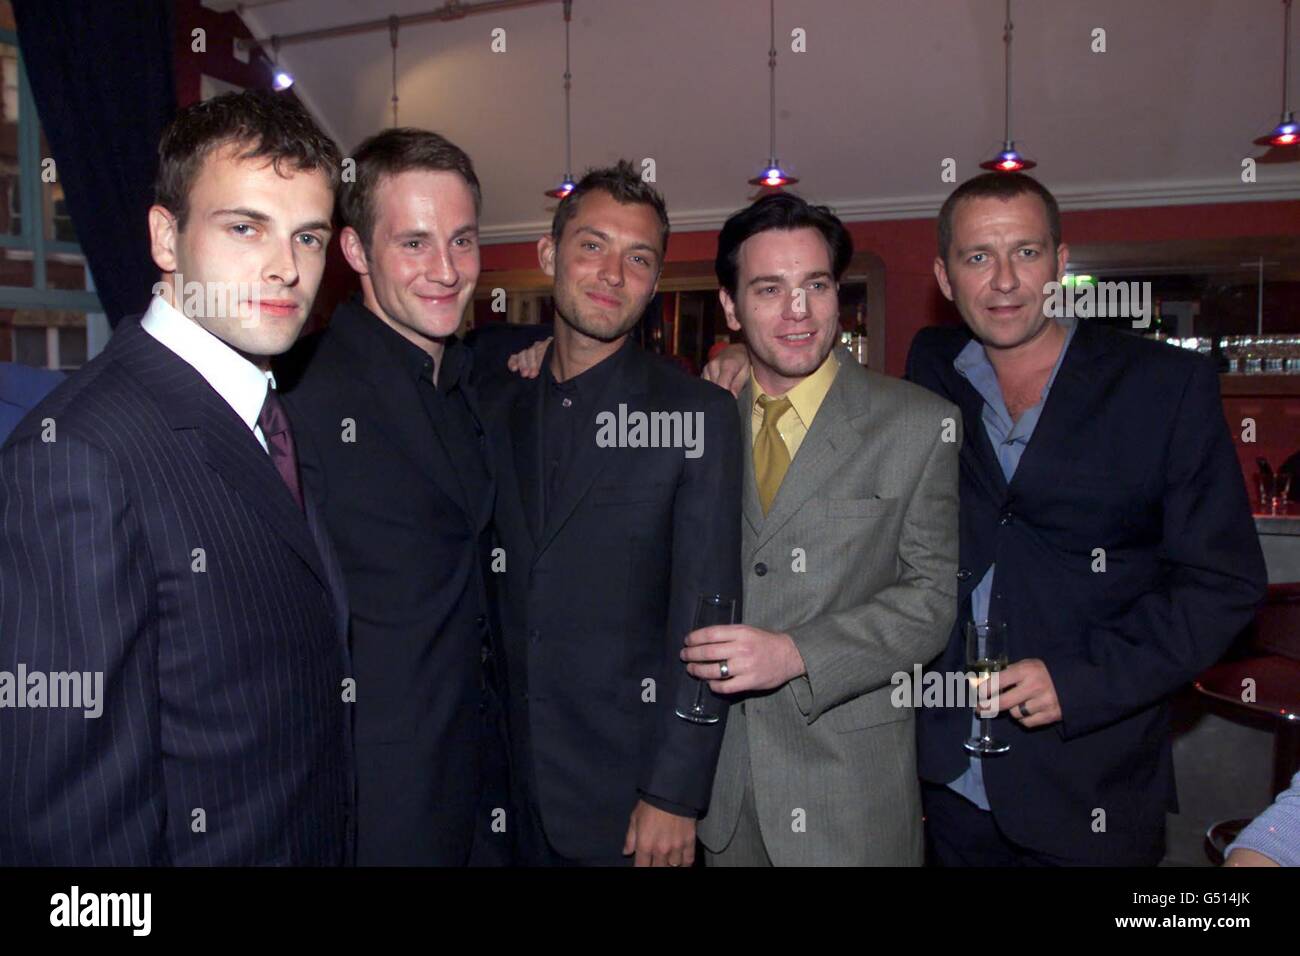 (L-R) Actors Johnny Lee Miller, Peter McDonald; Jude Law, Ewan McGregor and Sean Pertwee before the celebrity premiere of the film, 'Nora', at the Everyman Cinema in Hampstead, London. Stock Photo